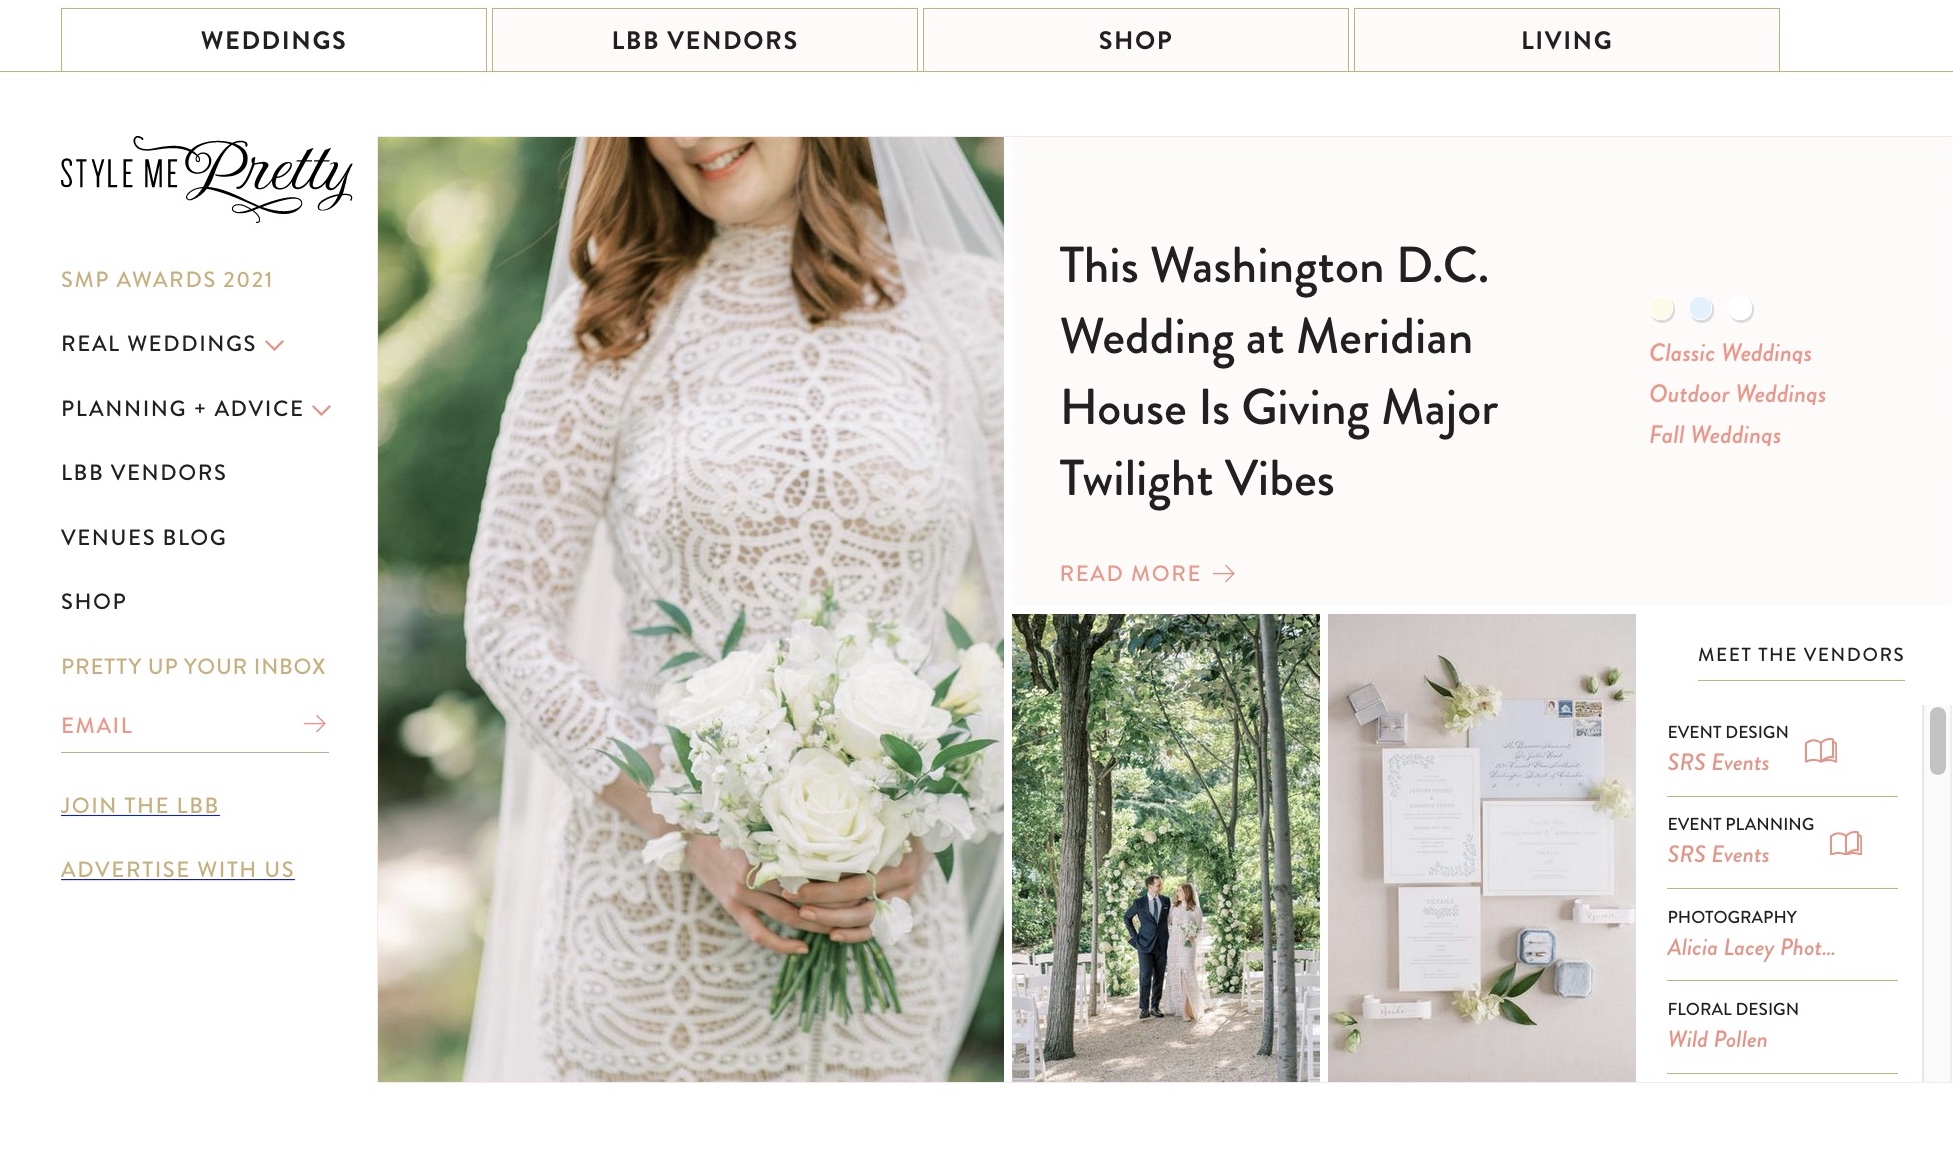 Washington, DC wedding photographer, Alicia Lacey, captured this stunning Meridian House wedding as featured on Style Me Pretty.